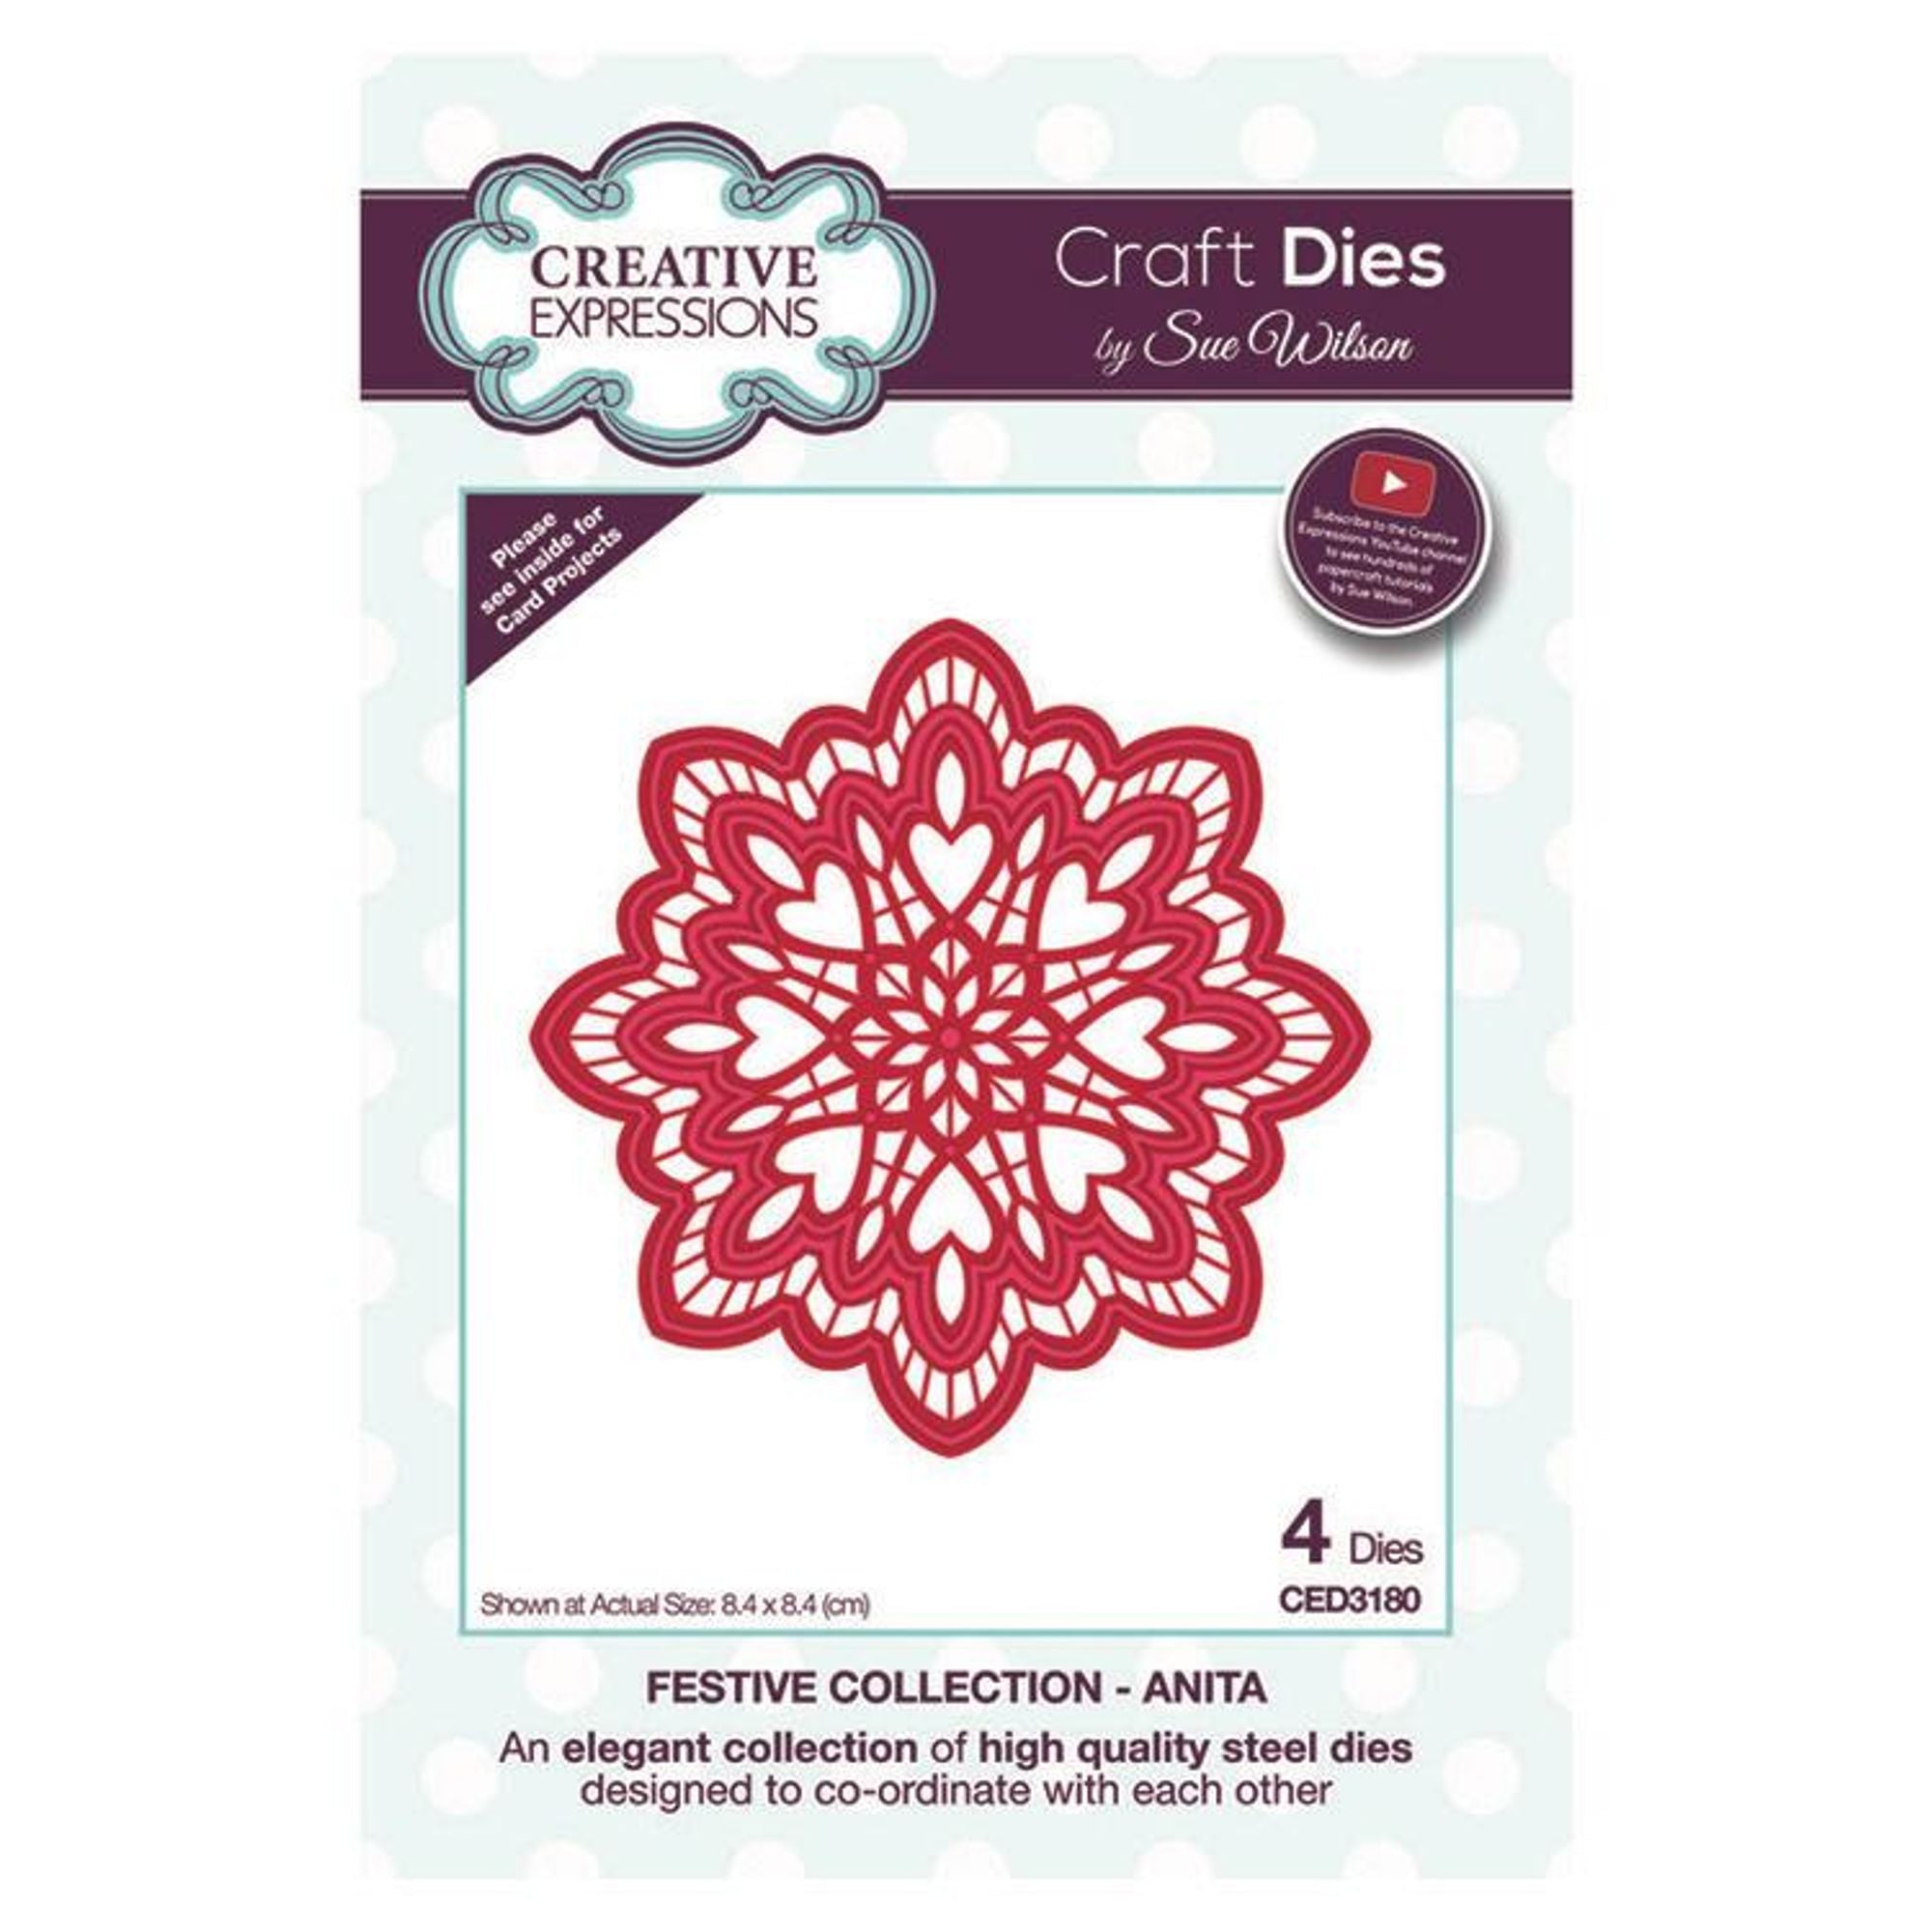 Creative Expressions Festive Collection - Anita Craft Die - 20419726 | HSN